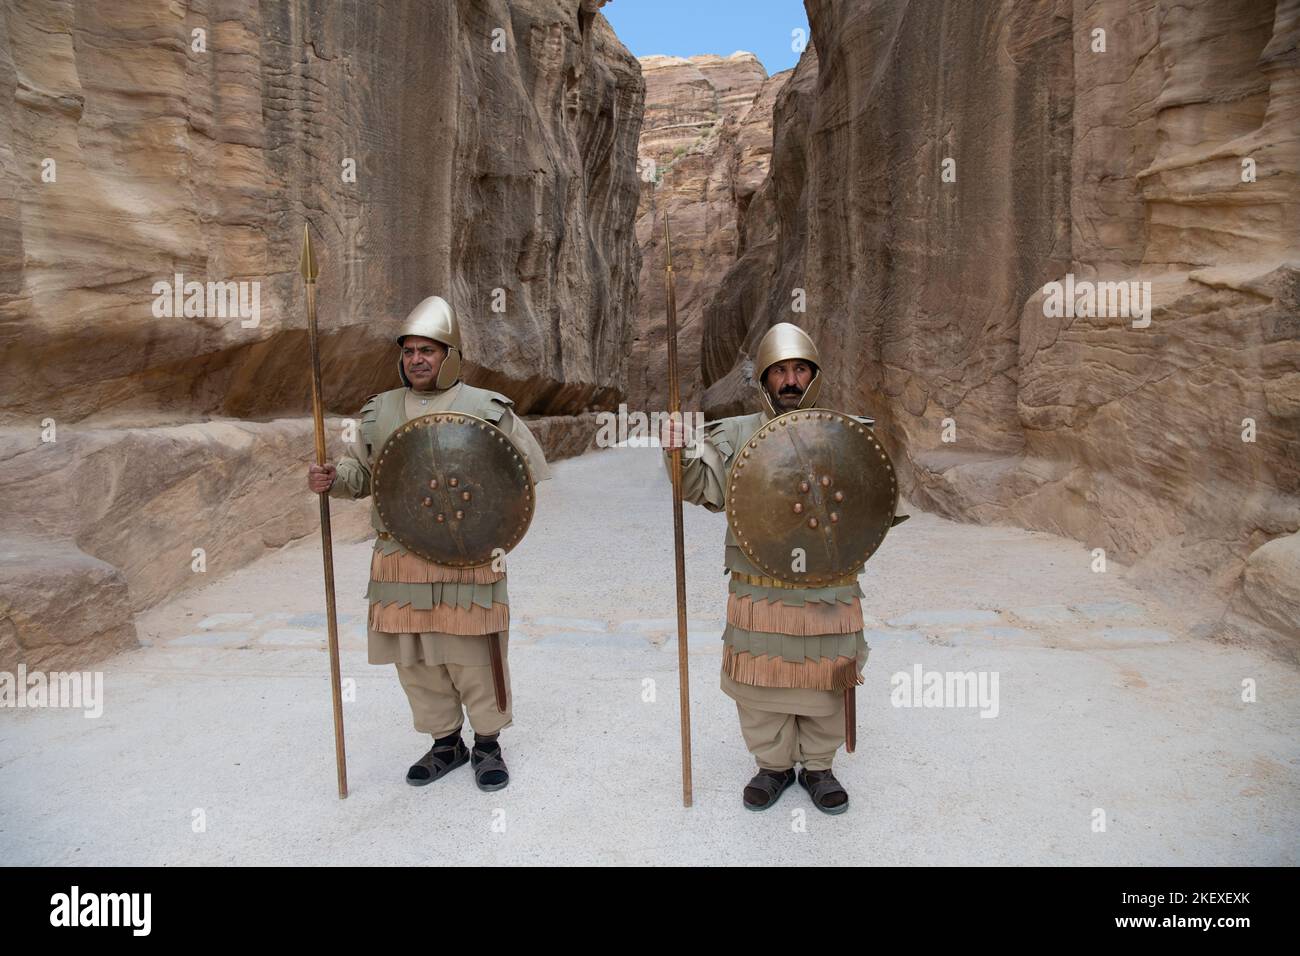 Two men dressed as Roman soldiers standing at beginning of siq or canyon for tourist photos Petra Jordan Stock Photo